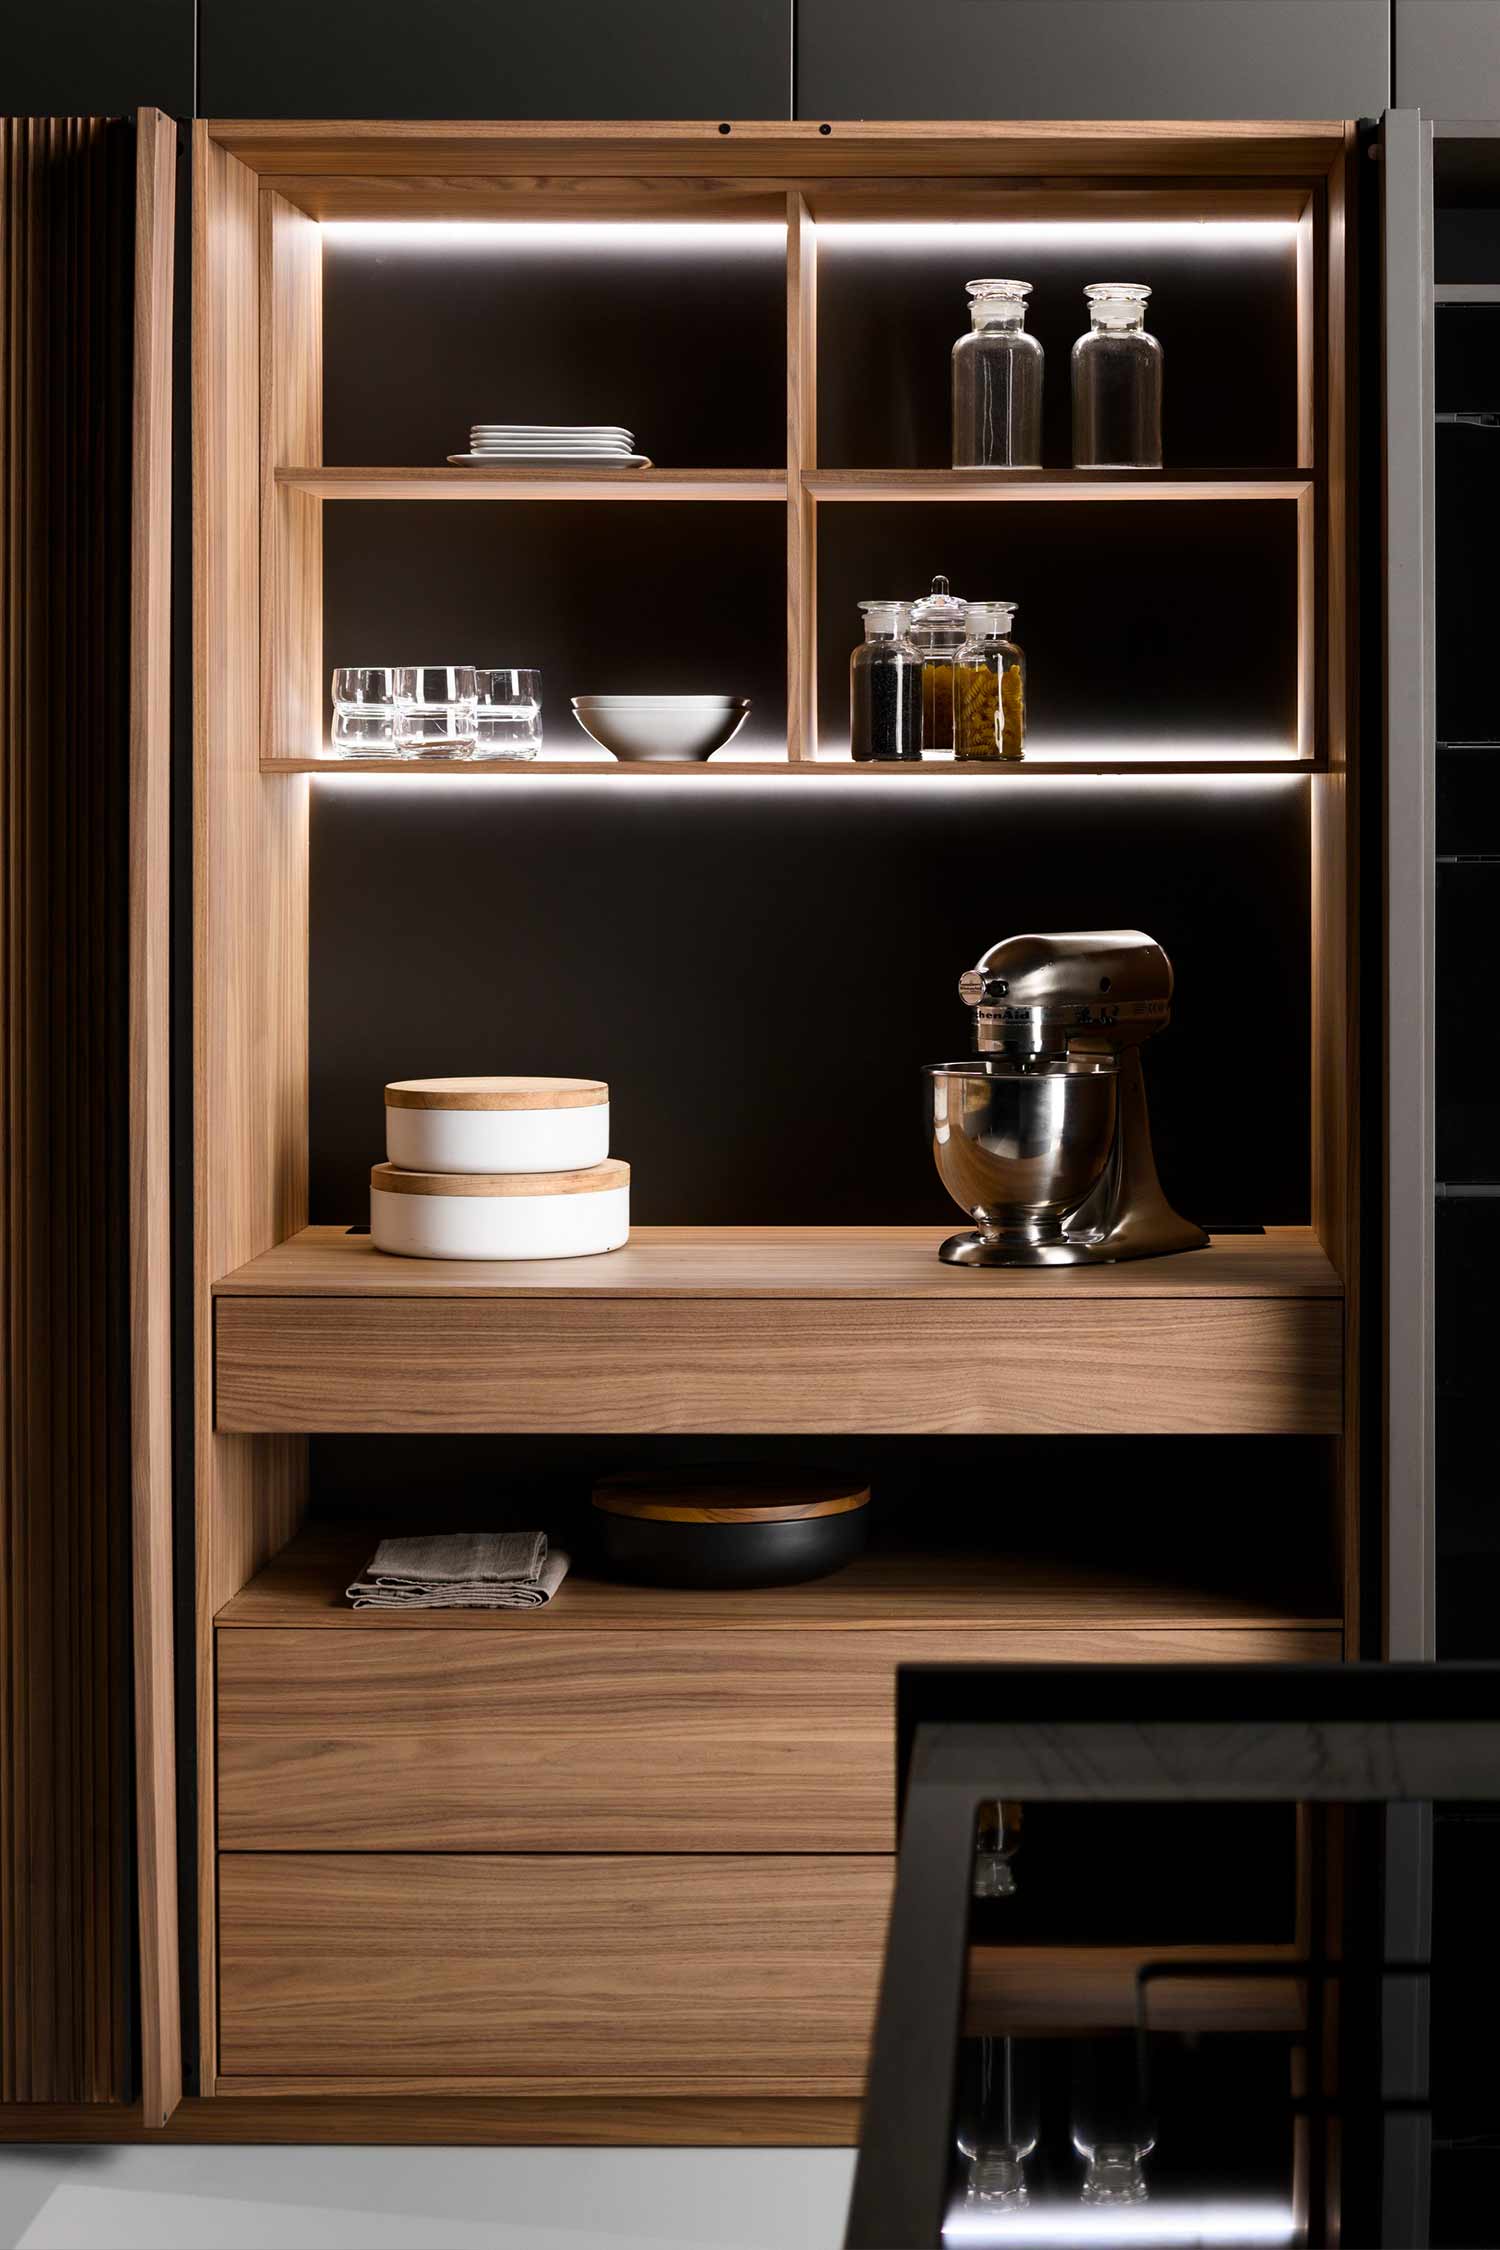 Concealed kitchen units and storage within the luxury walnut veneer kitchen tall units.